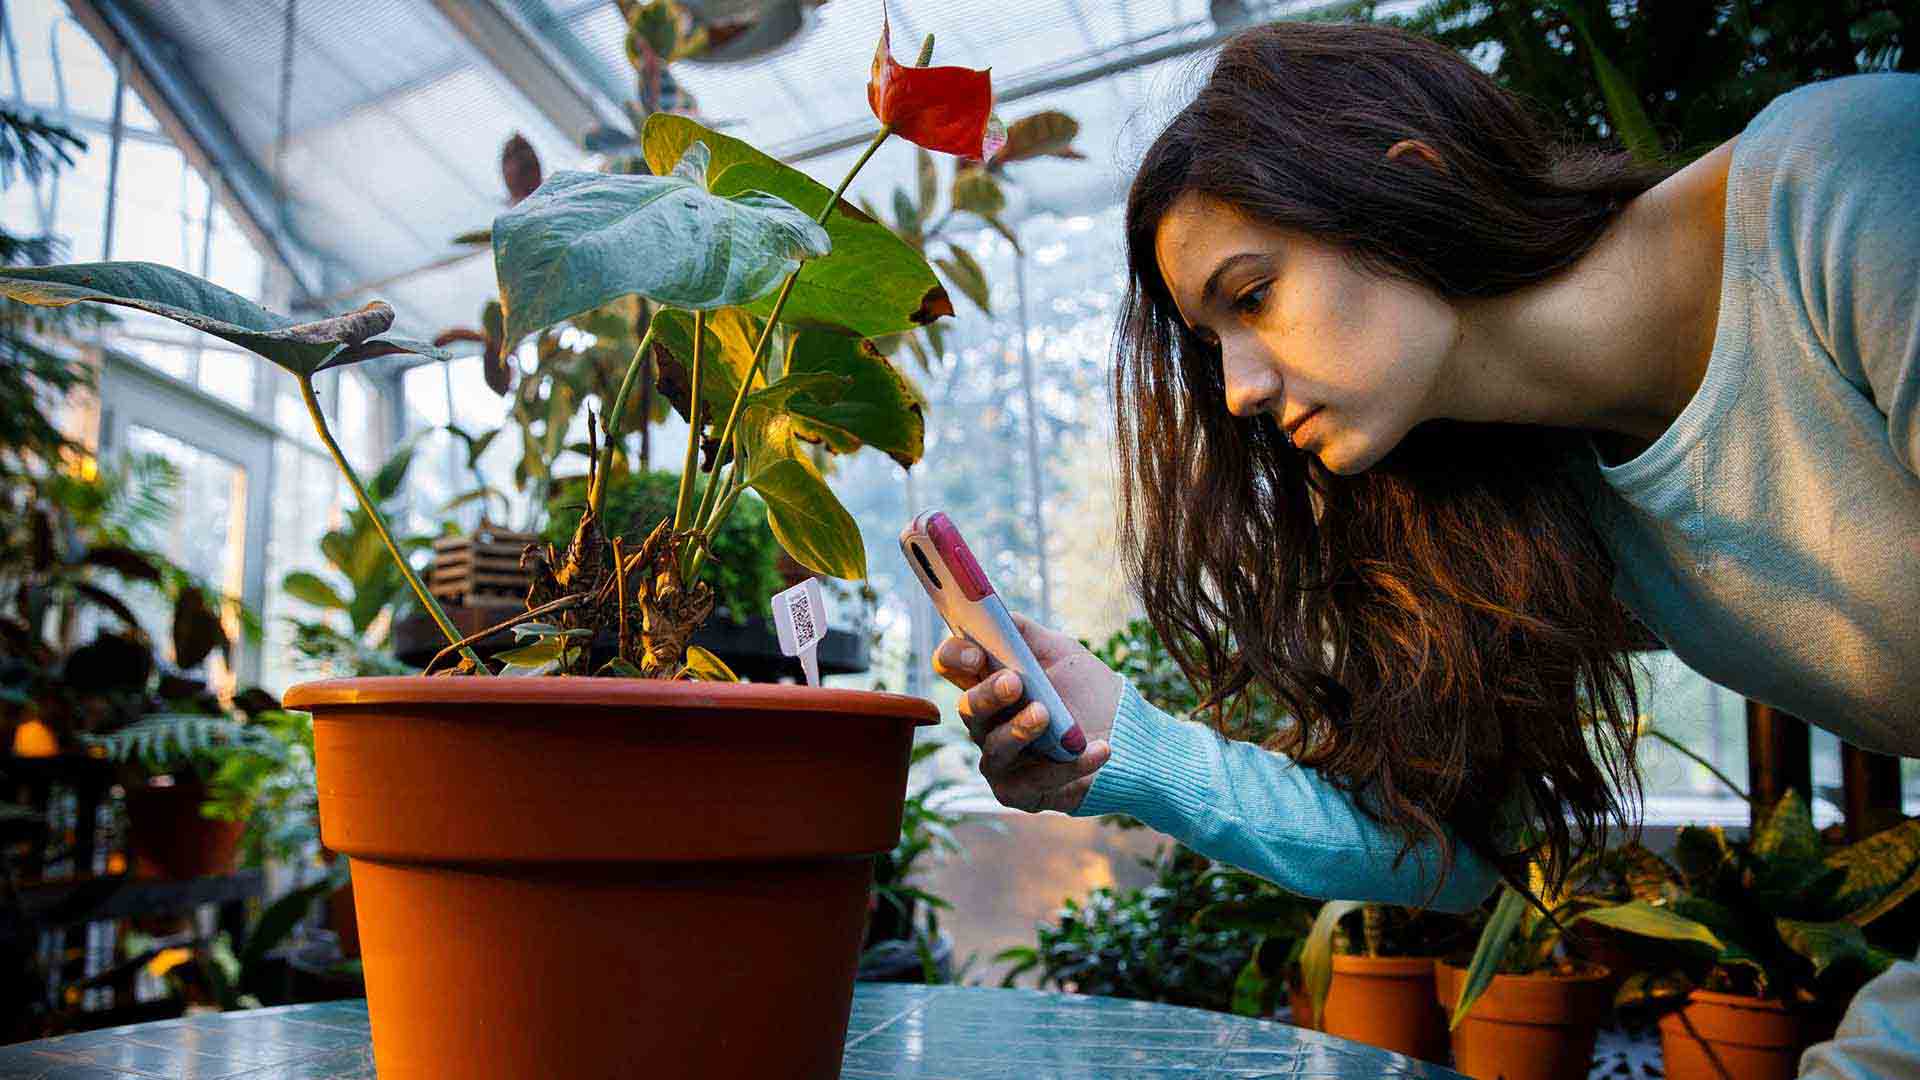 Biology major Kristen Bastug uses a smart phone to read a QR code (barcode) at a Plants, Food and Medicine class session in the John Roach Center for the Liberal Arts Greenhouse.